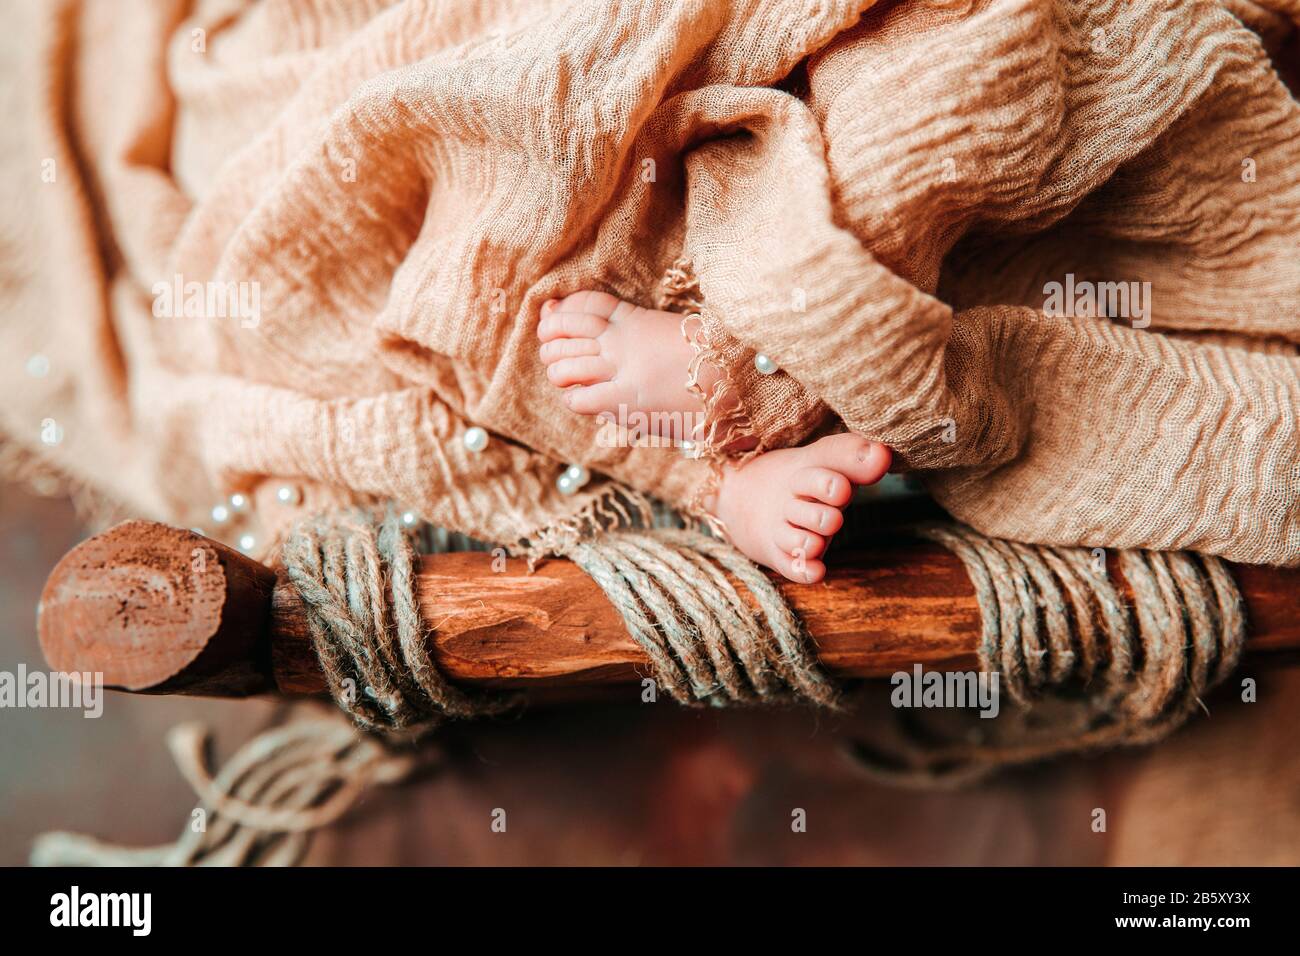 A newborn cute baby sleeping in a vintage wooden cradle with open foot and toes Stock Photo